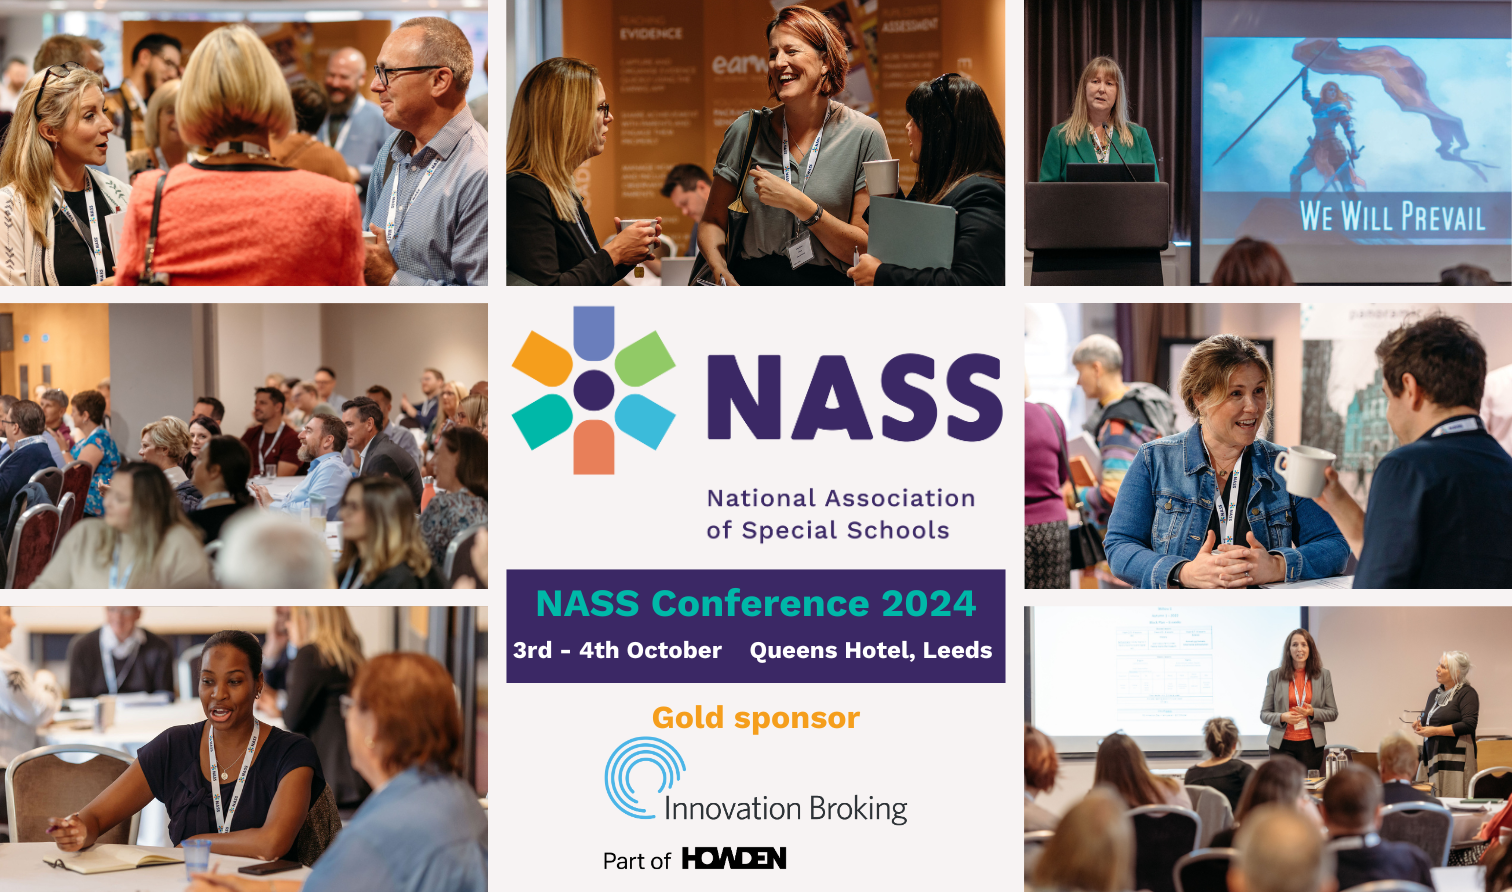 NASS Conference 2024 is taking place in Leeds on Thursday 3rd to Friday 4th October.